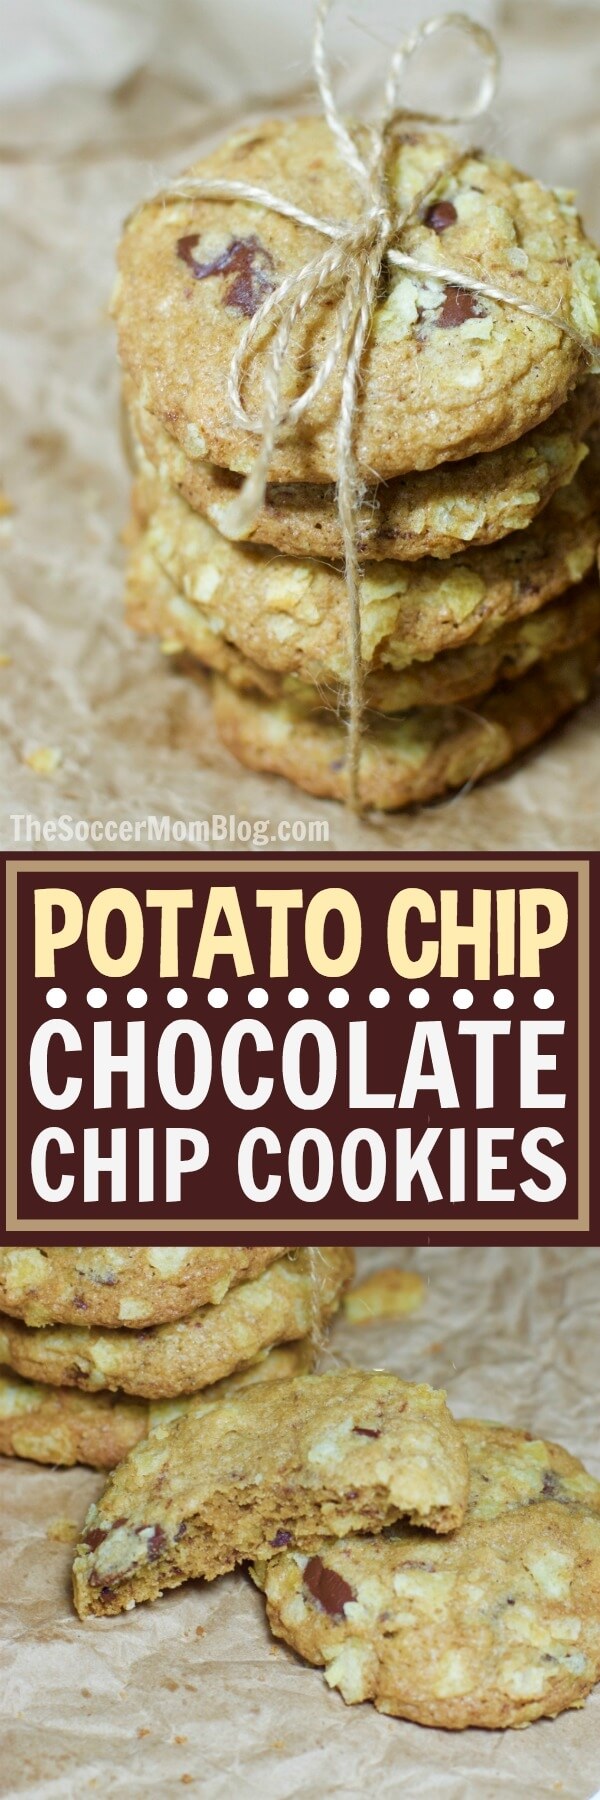 The perfect combination of sweet and salty in every bite — these Potato Chip Chocolate Chip Cookies are a WOW-worthy sweet treat for any occasion!